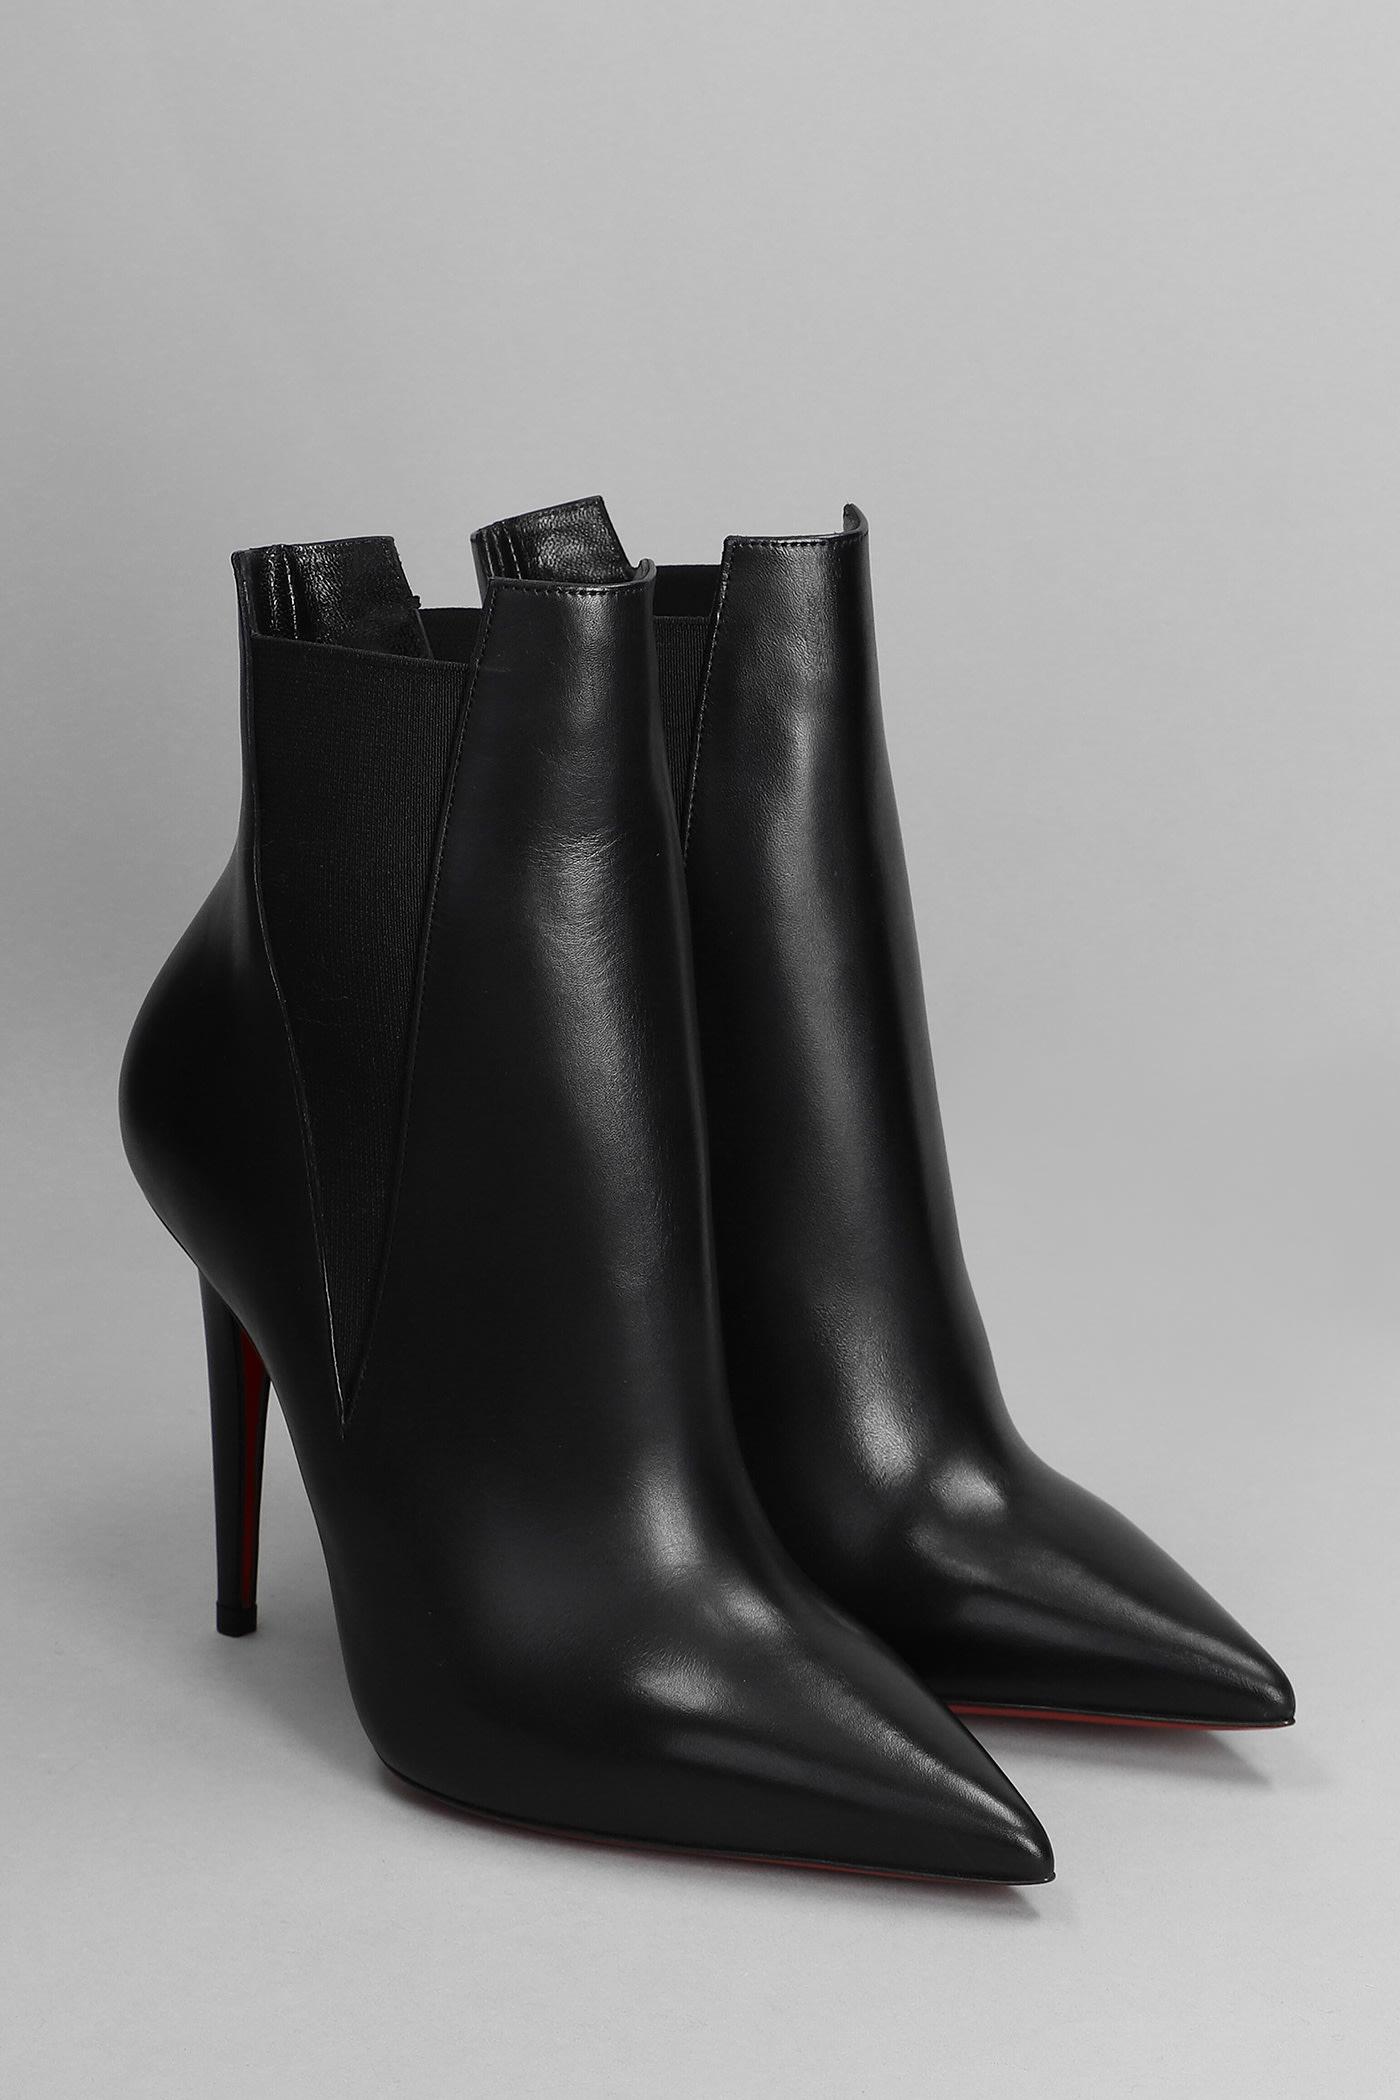 Christian Louboutin Astribooty 100 High Heels Ankle Boots In Black Leather  | Lyst